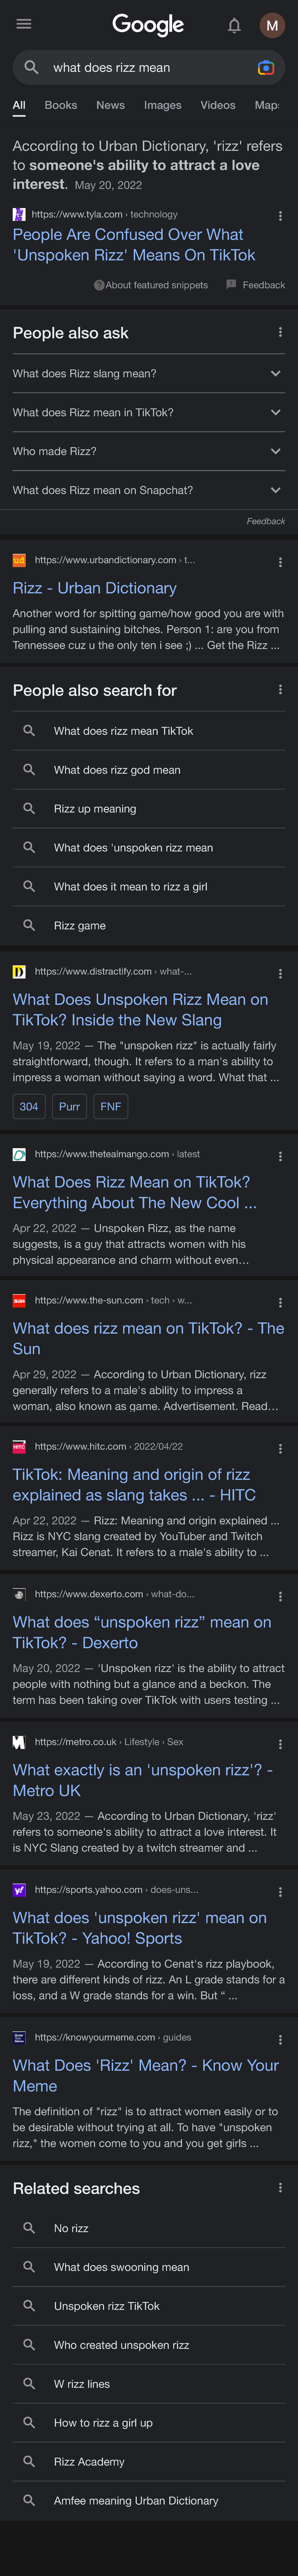 What is rizz on TikTok? The meaning behind the word fully explained